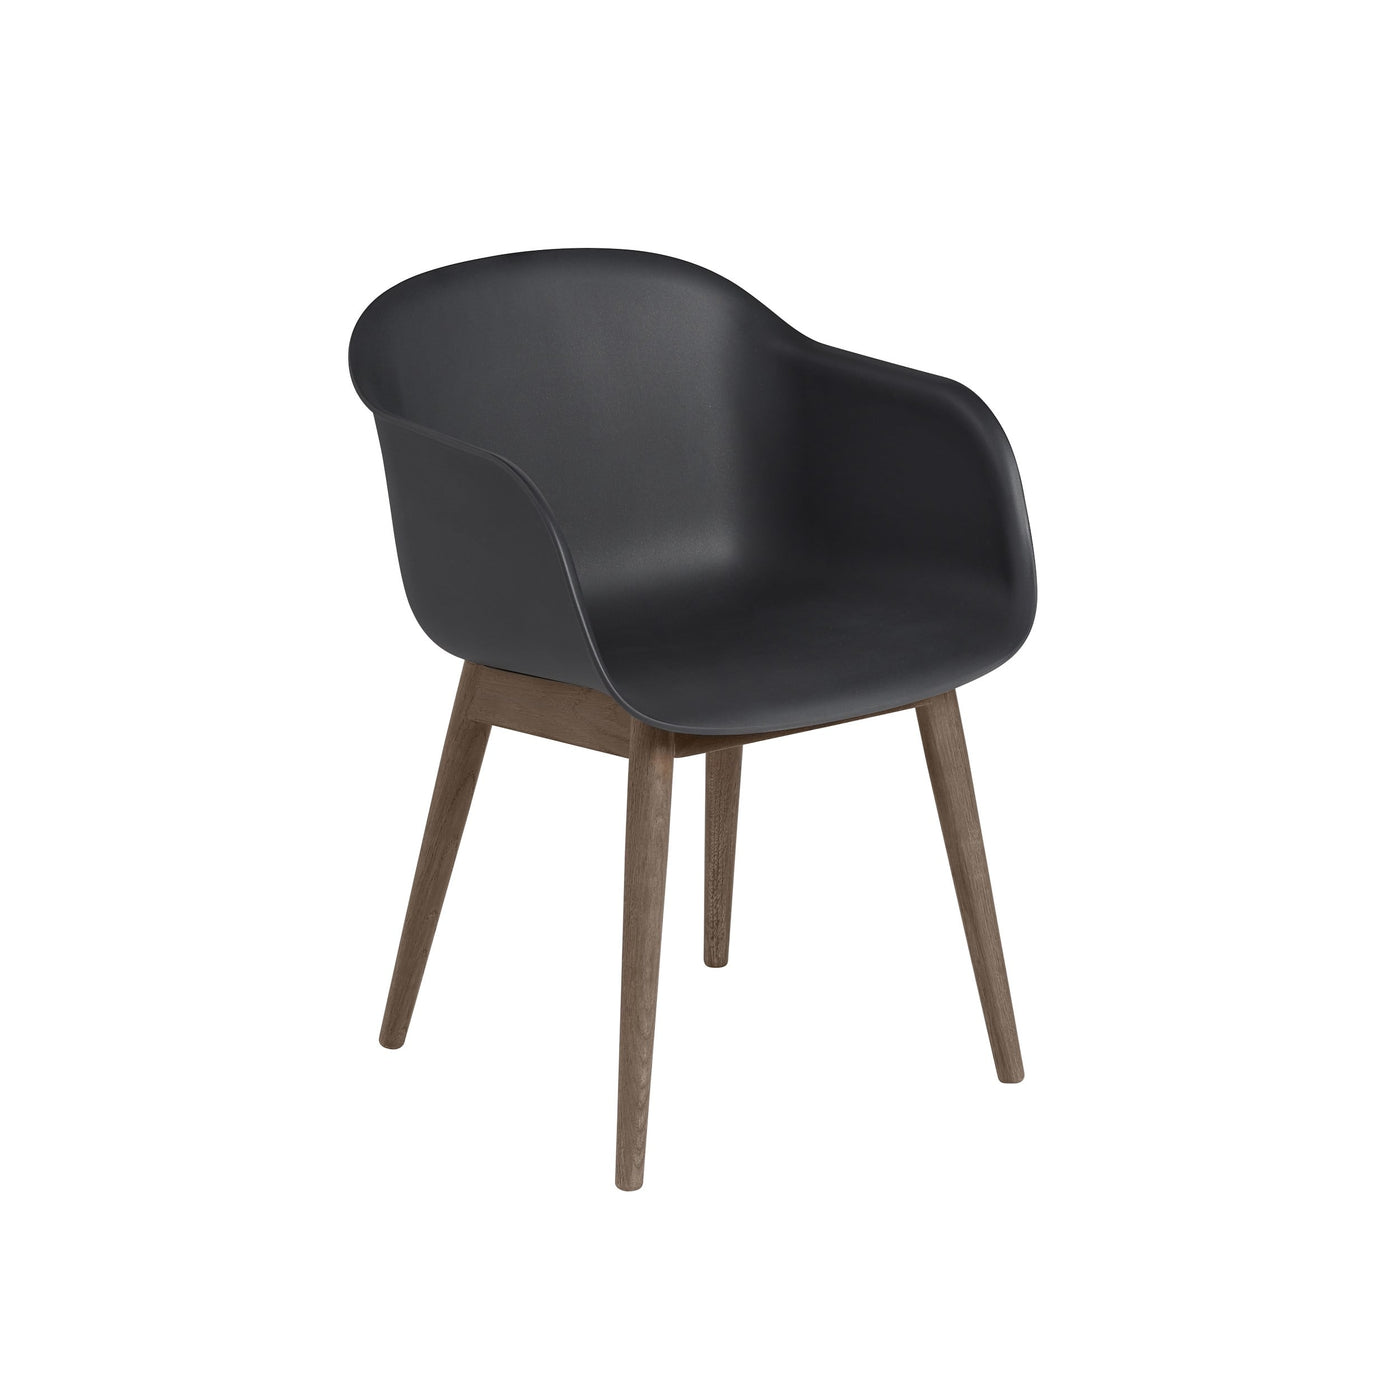 Muuto Fiber Armchair with wood stained dark brown base in black. Shop online at someday designs. #colour_black